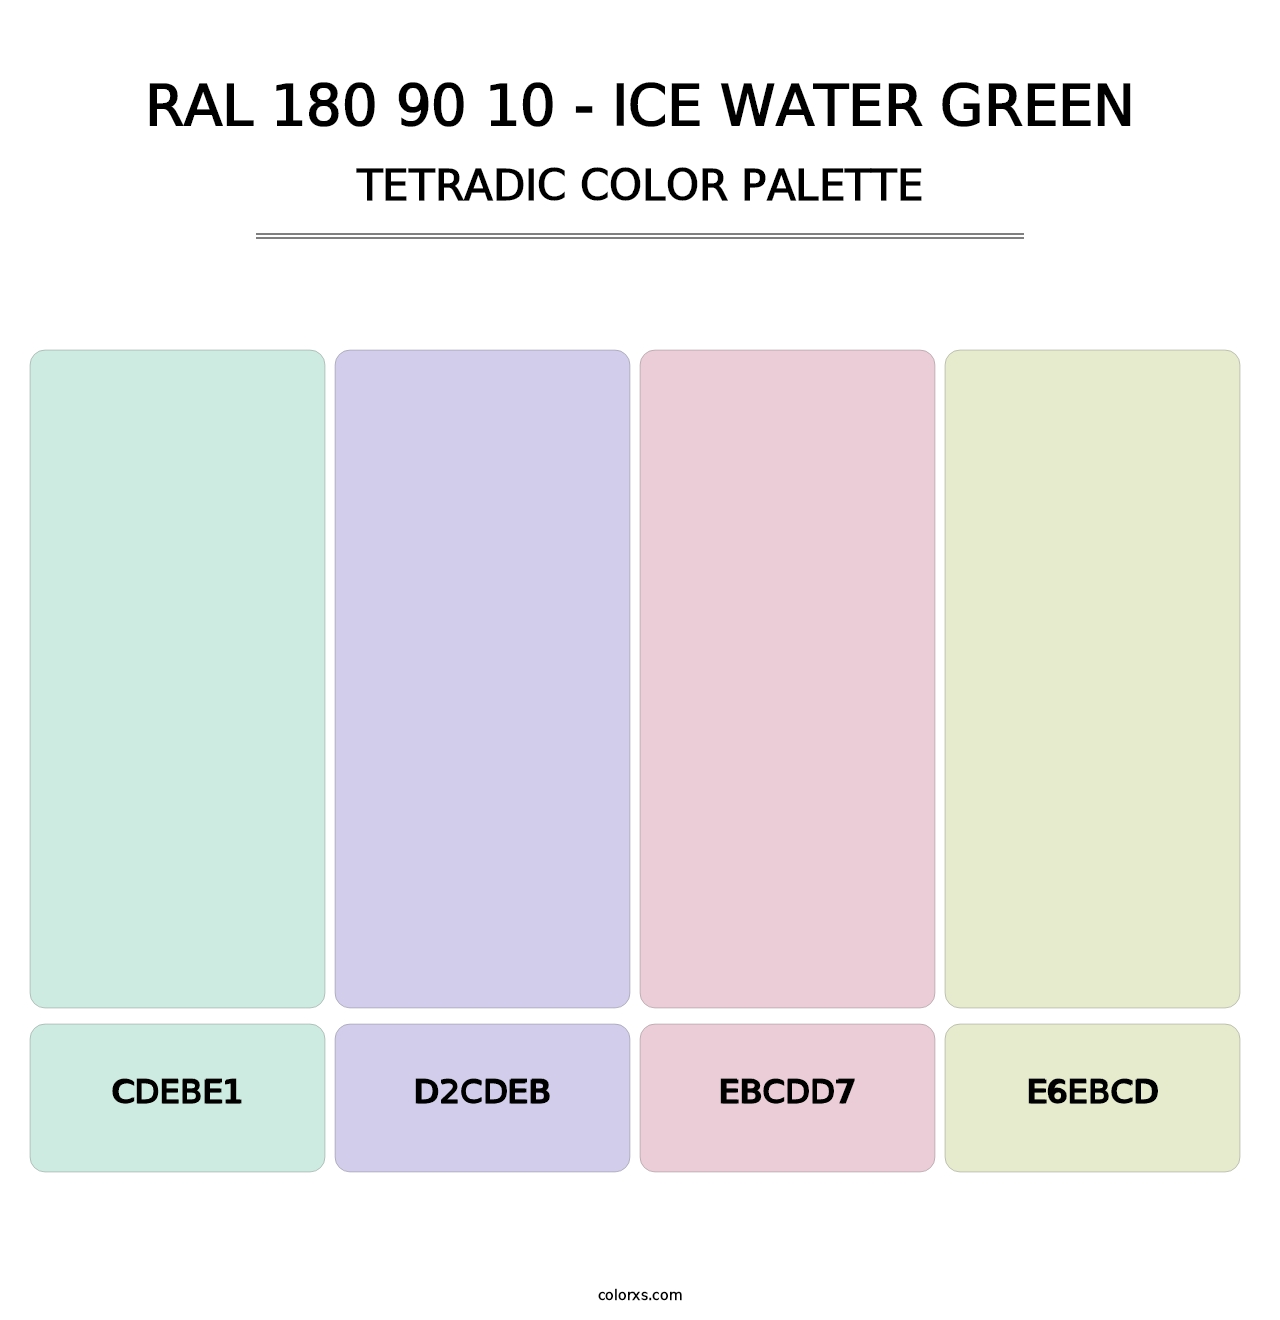 RAL 180 90 10 - Ice Water Green - Tetradic Color Palette